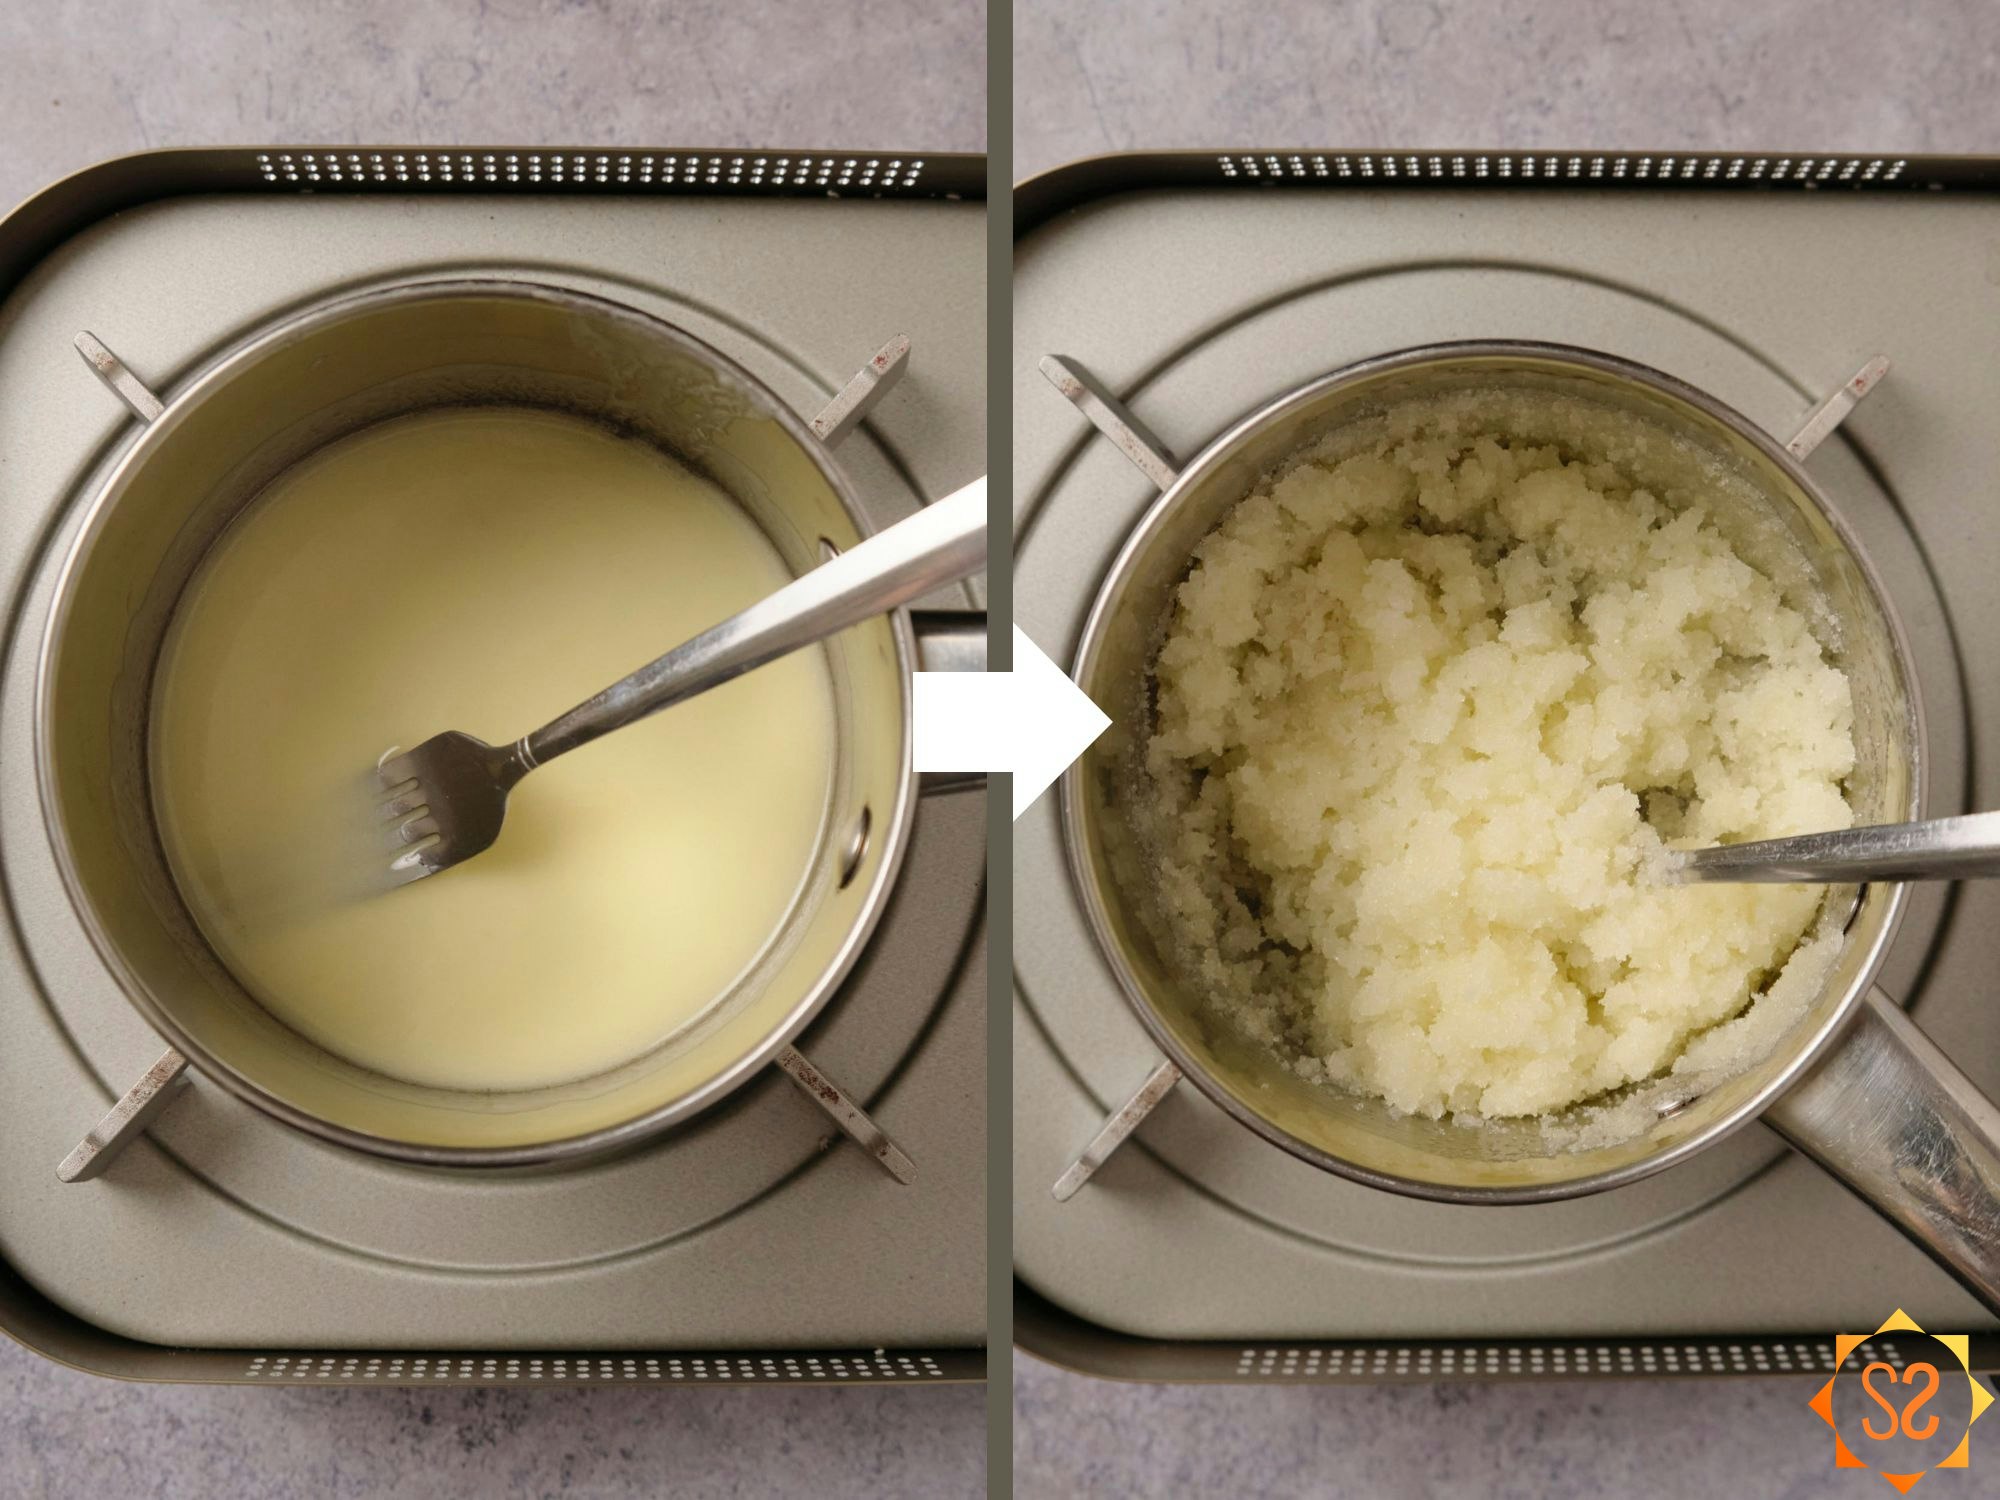 Left: melting vegan butter in a pan; right: mixing in the sugar with vegan butter.